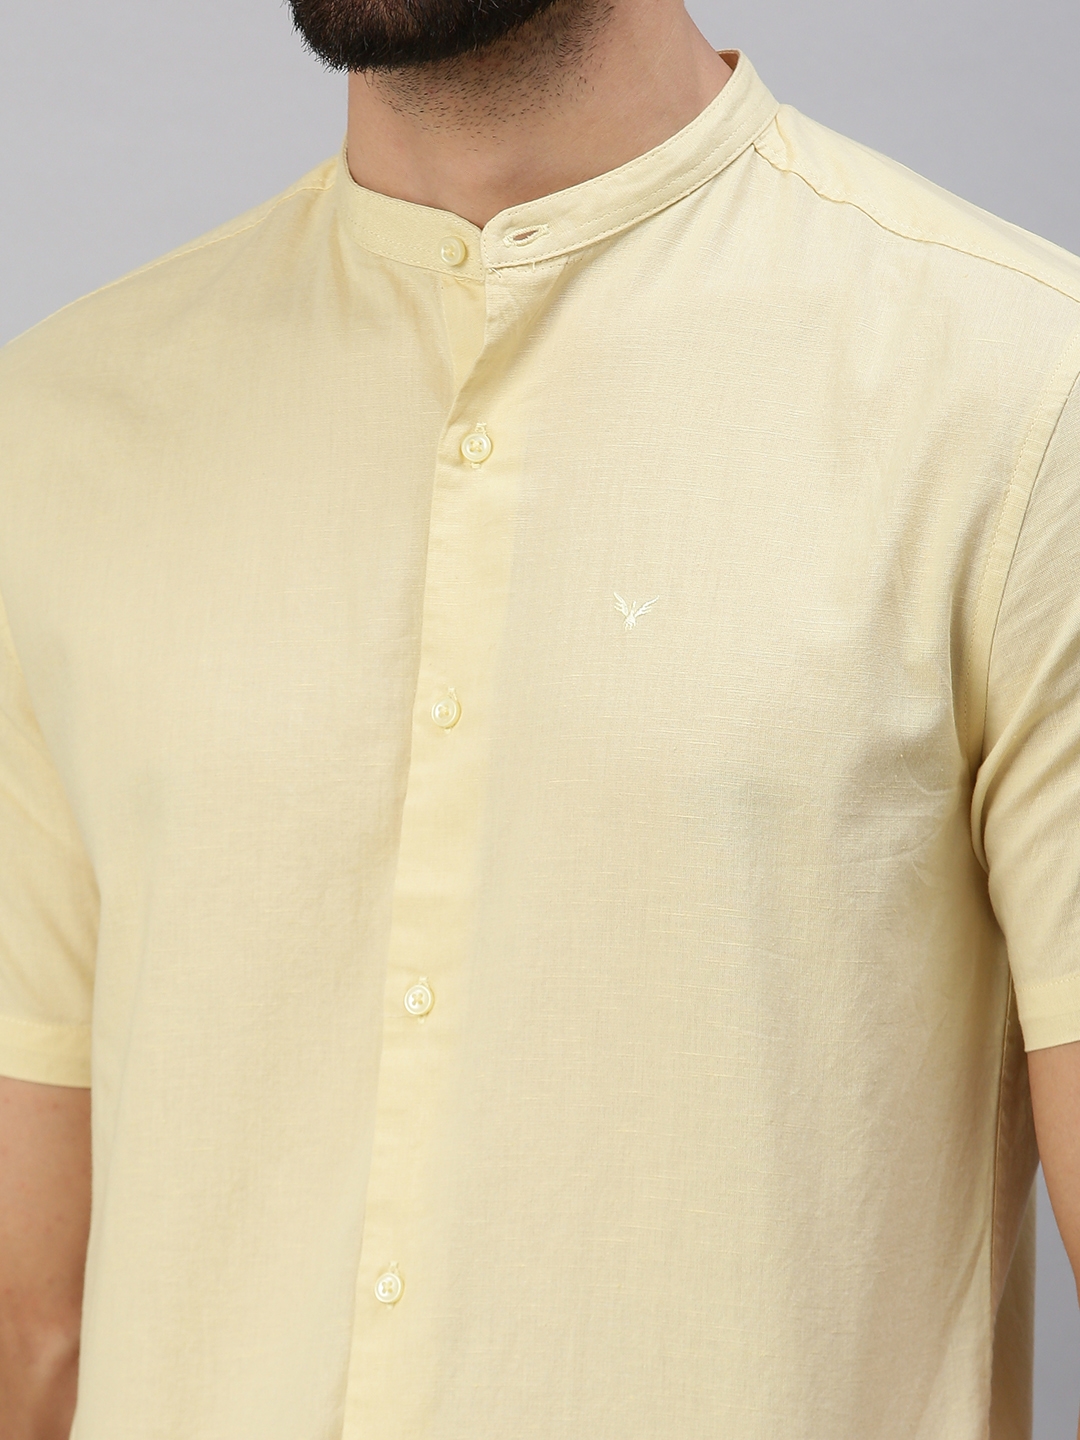 Men's Yellow Cotton Solid Casual Shirts